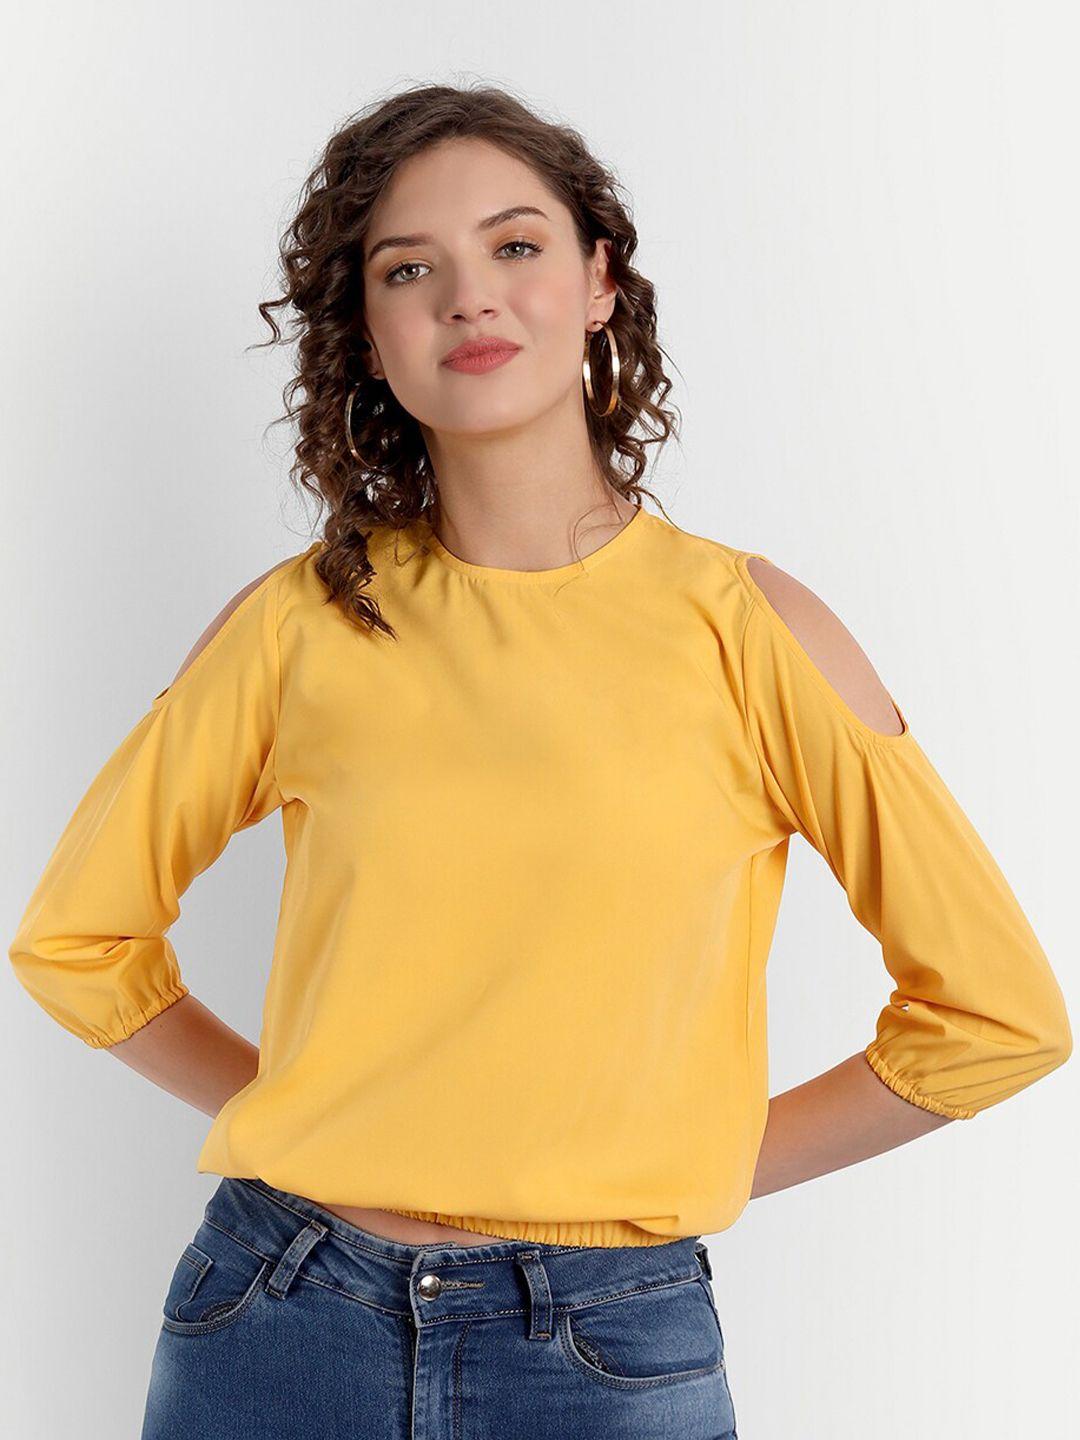 parassio clothings yellow georgette top